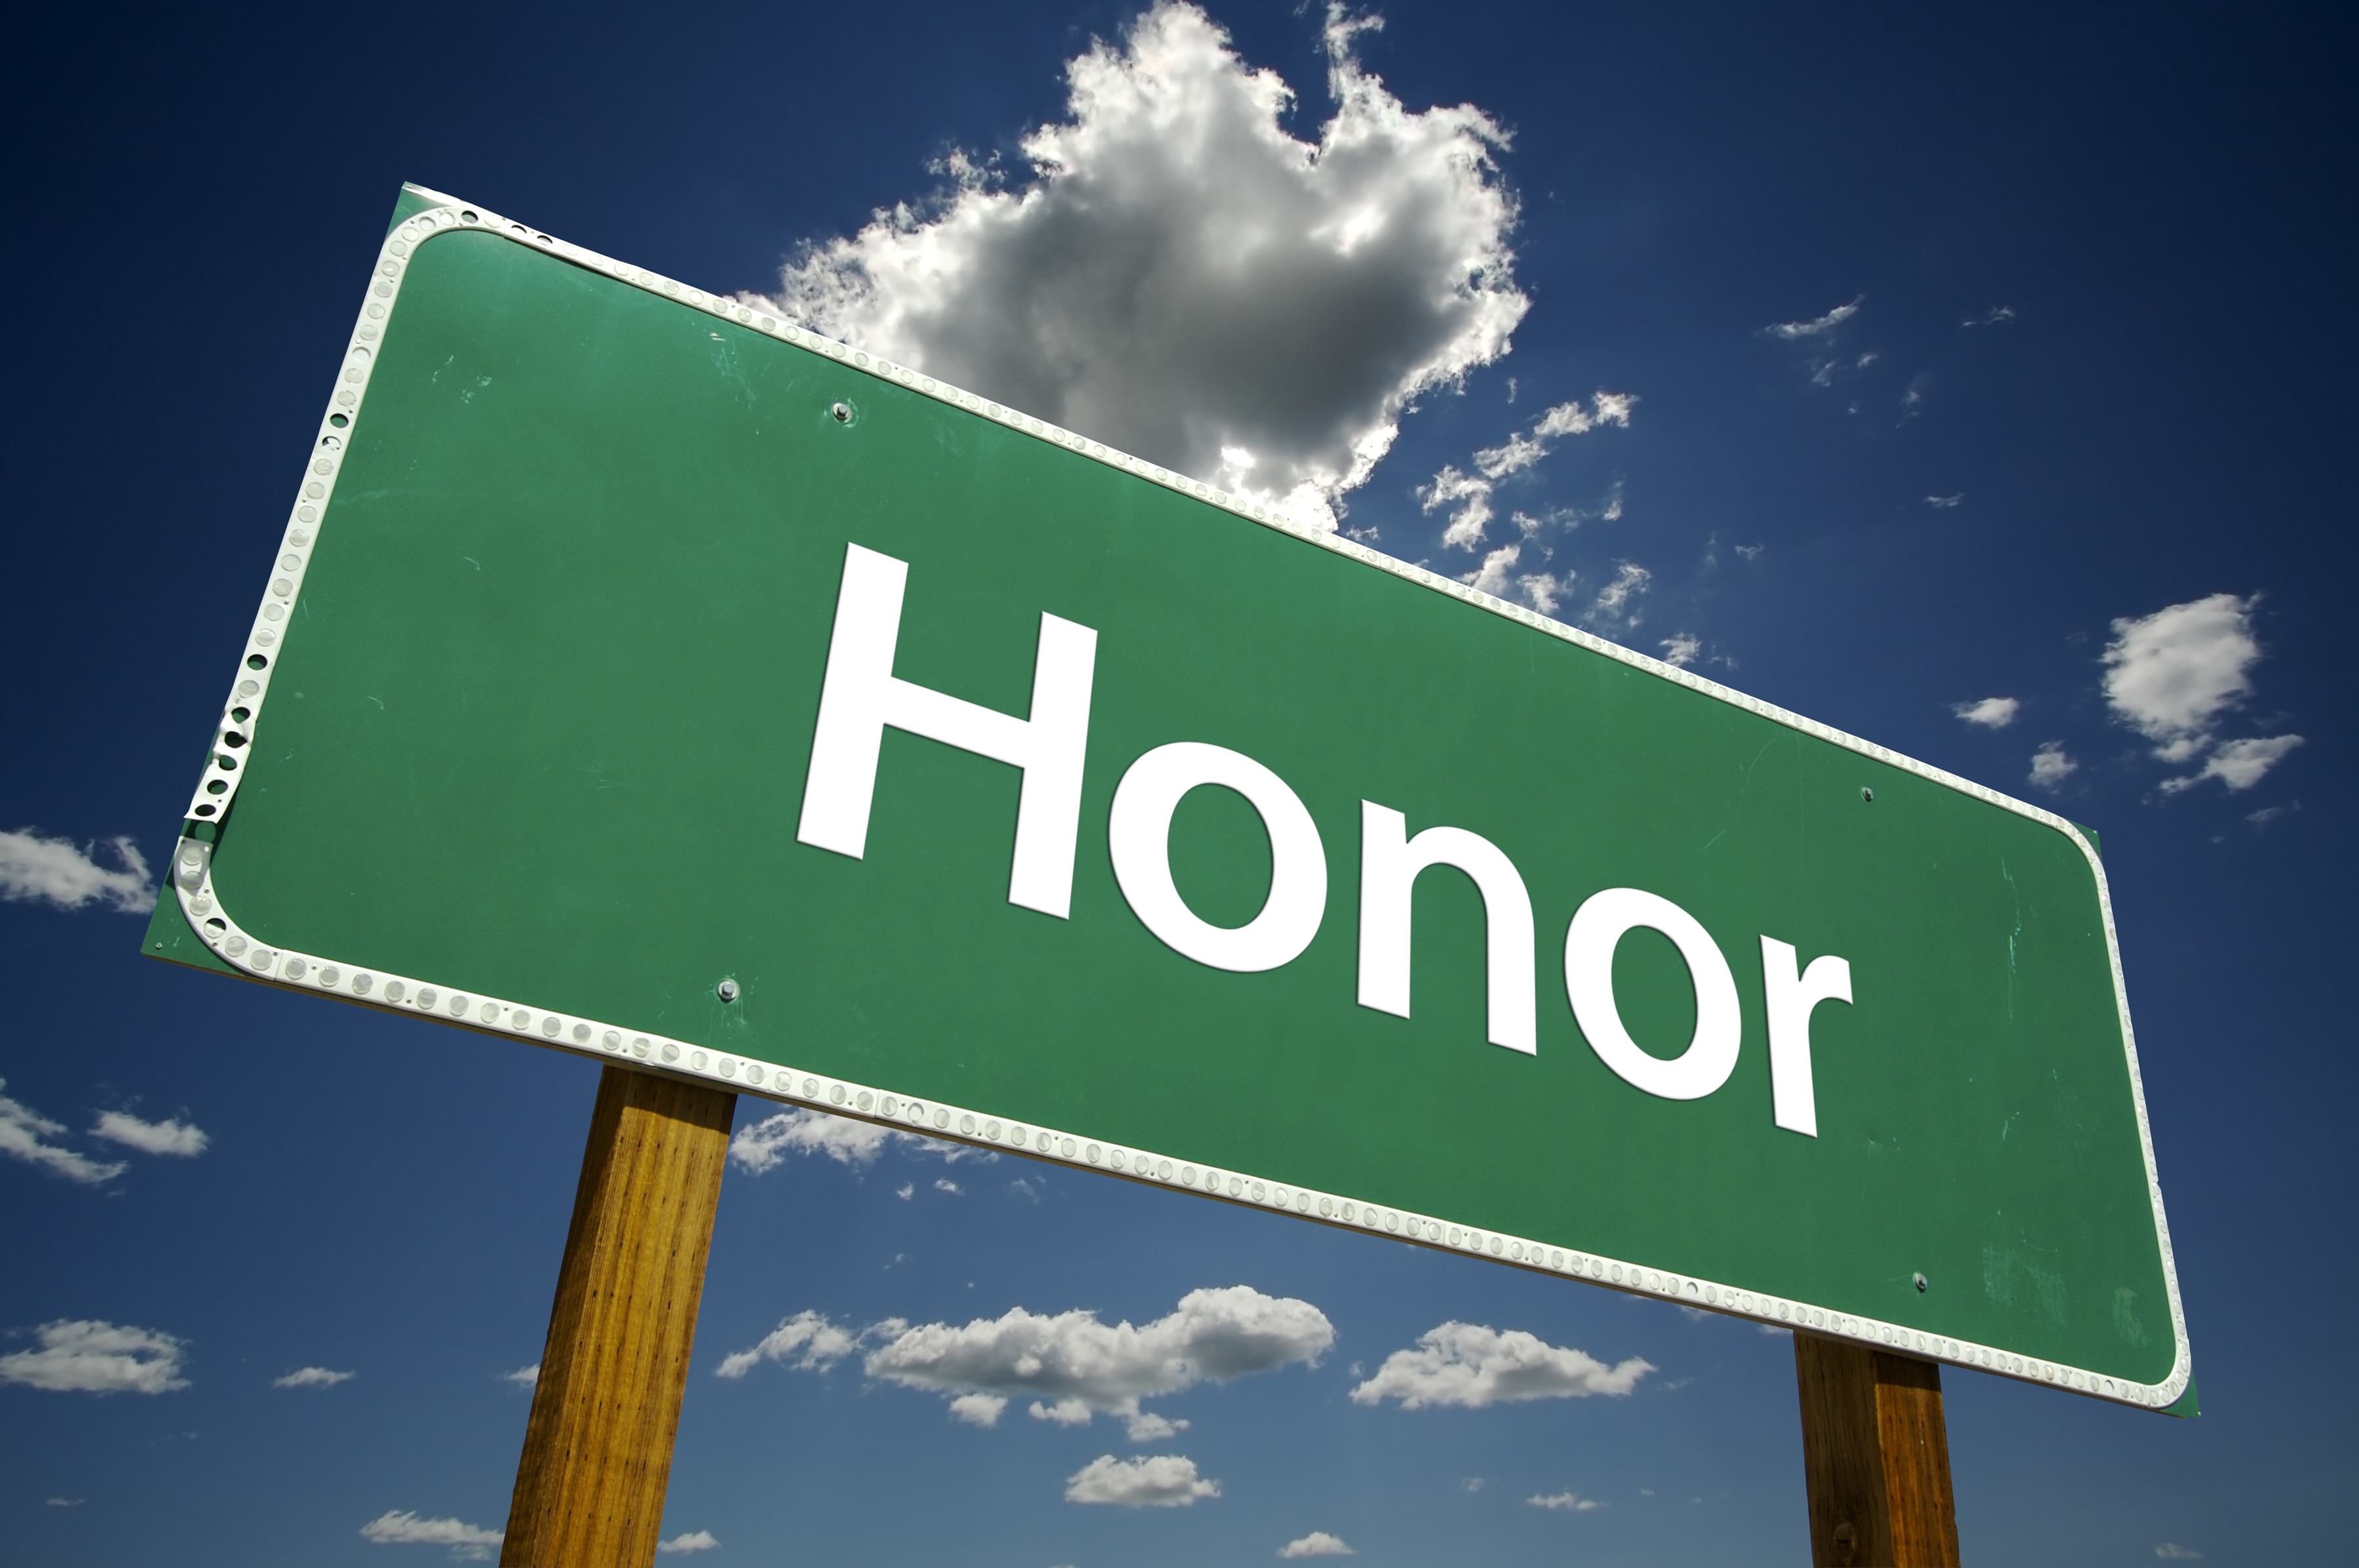 How to Honor God’s Name | Mike's Place on the Web